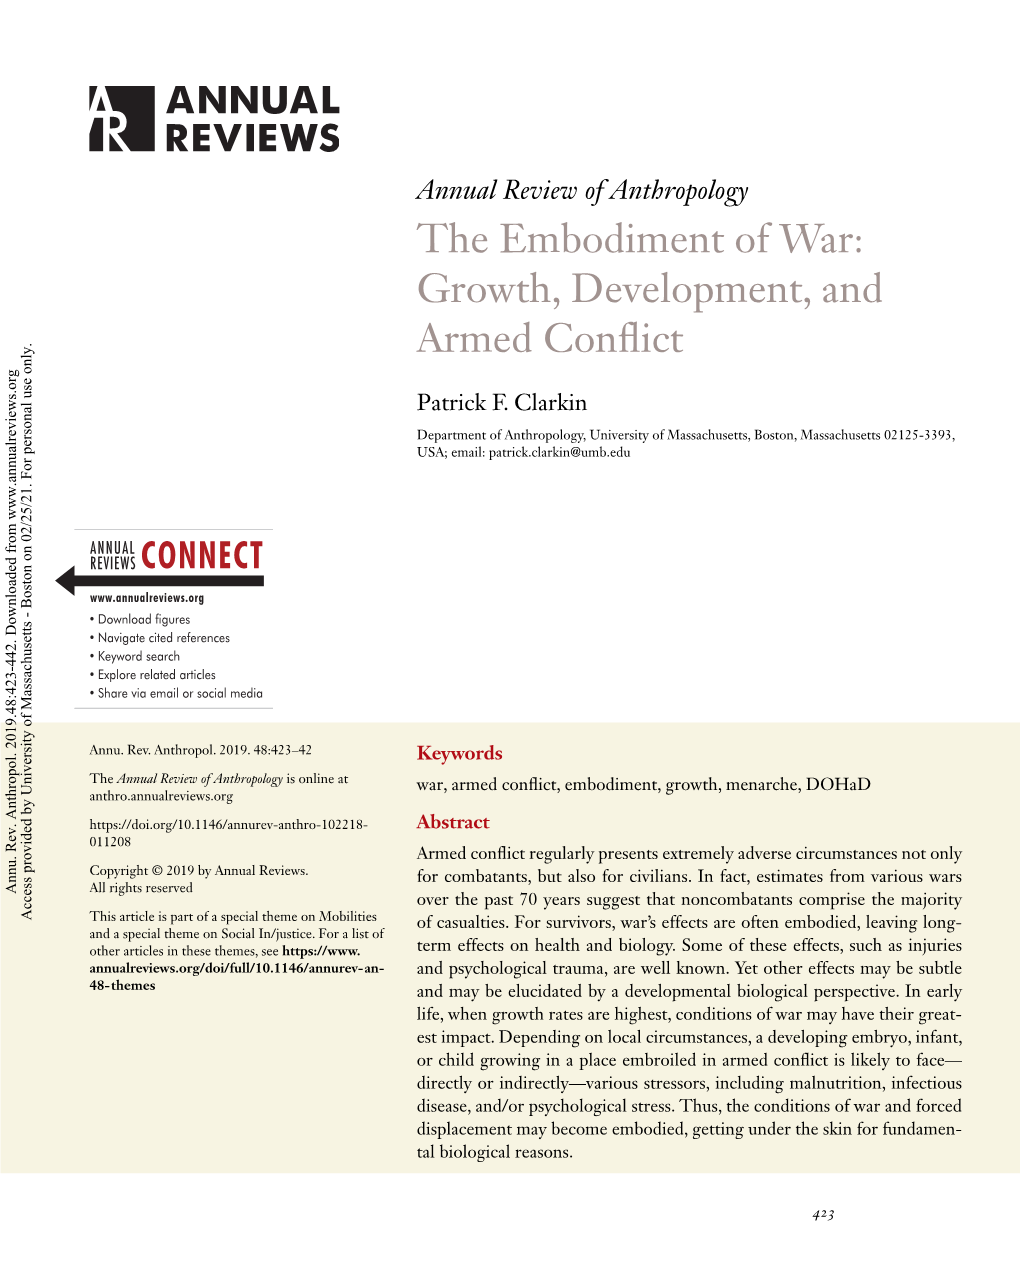 The Embodiment of War: Growth, Development, and Armed Conflict